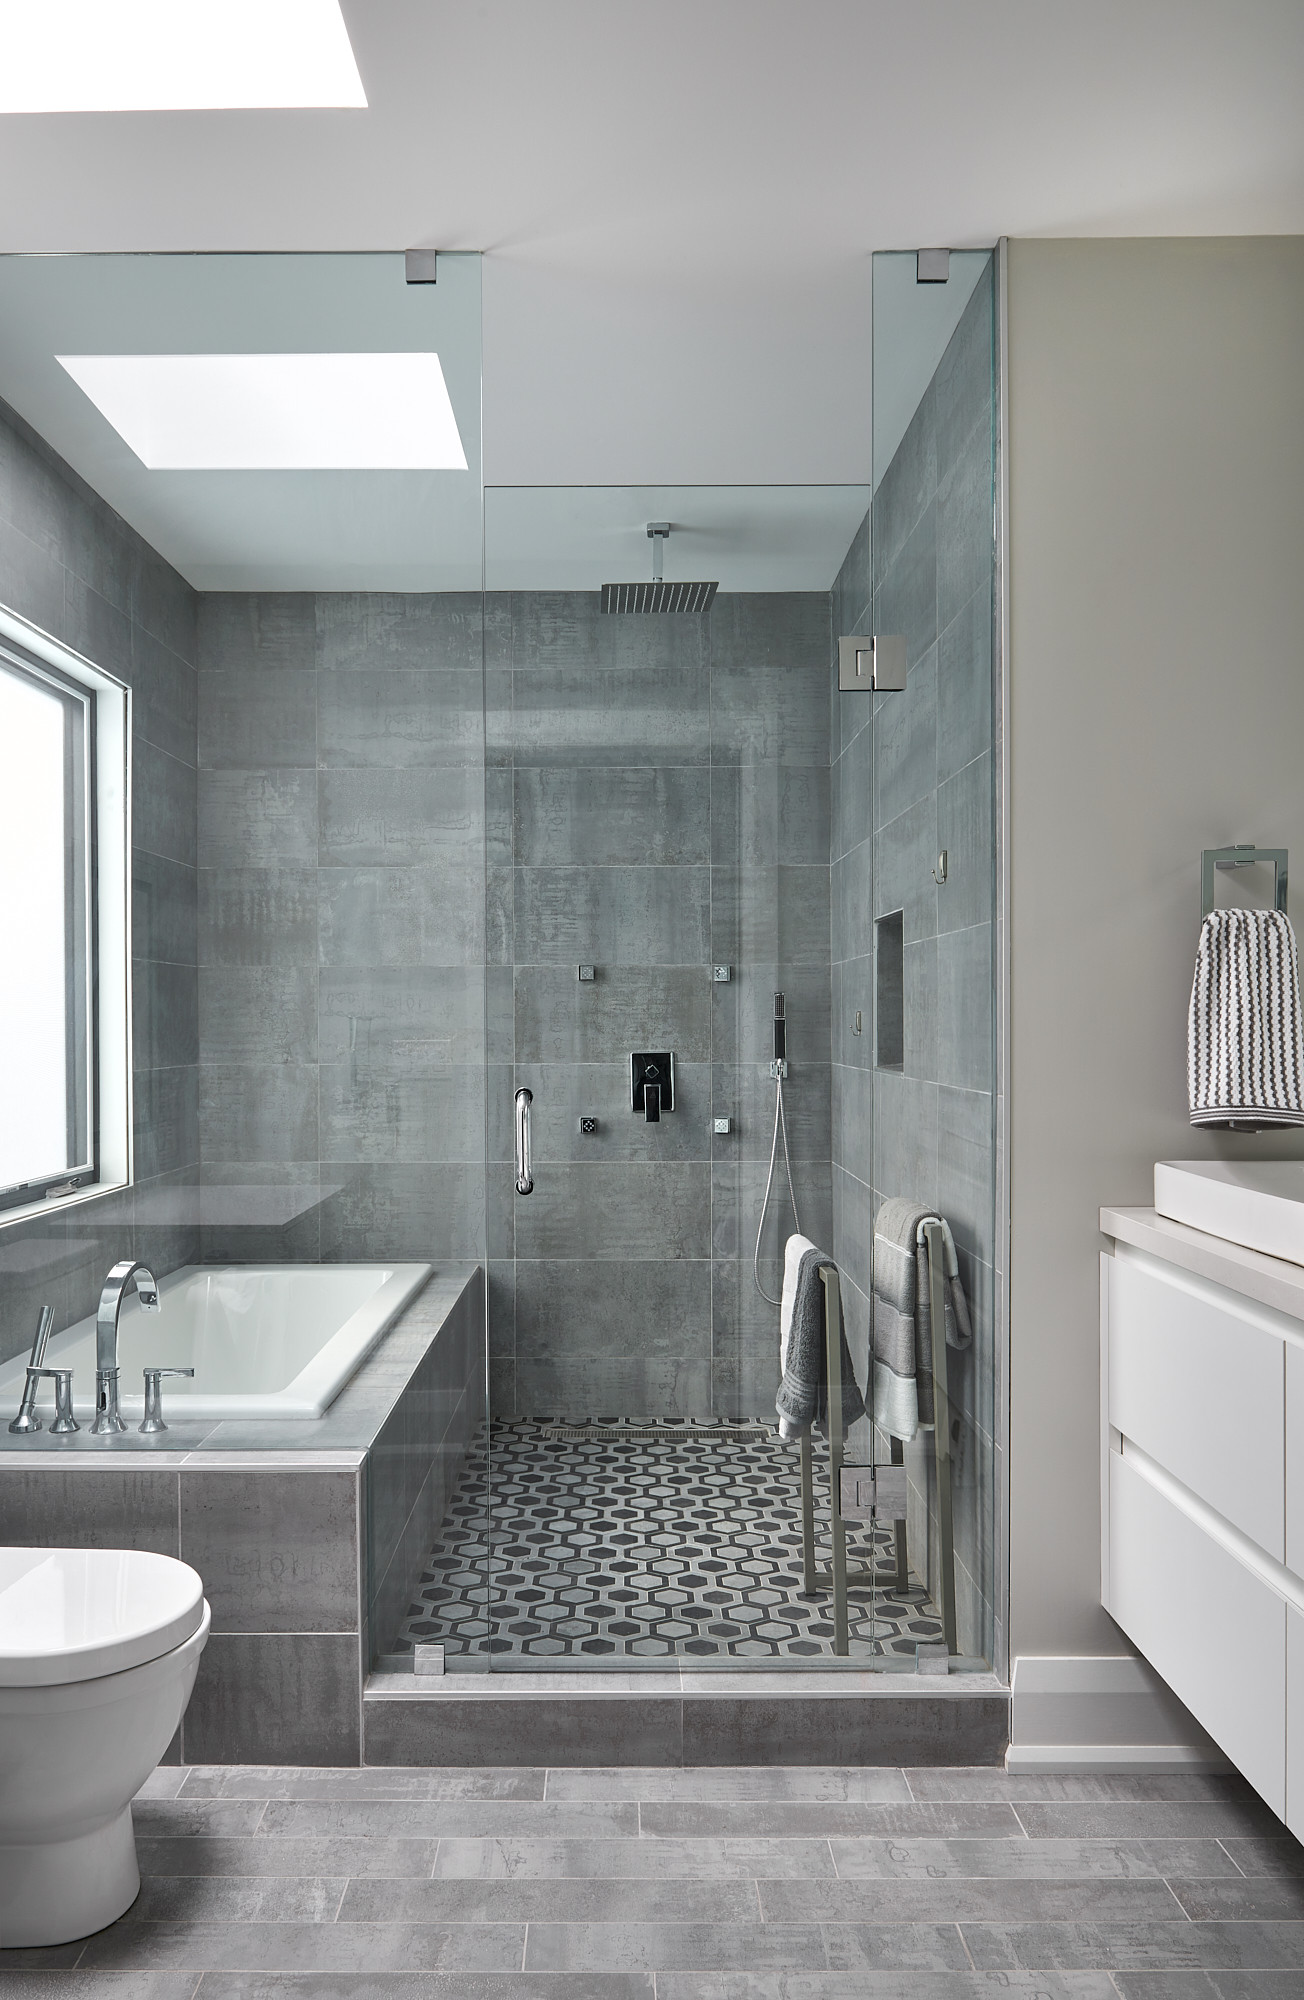 Can you tile over wall tiles in a bathroom?